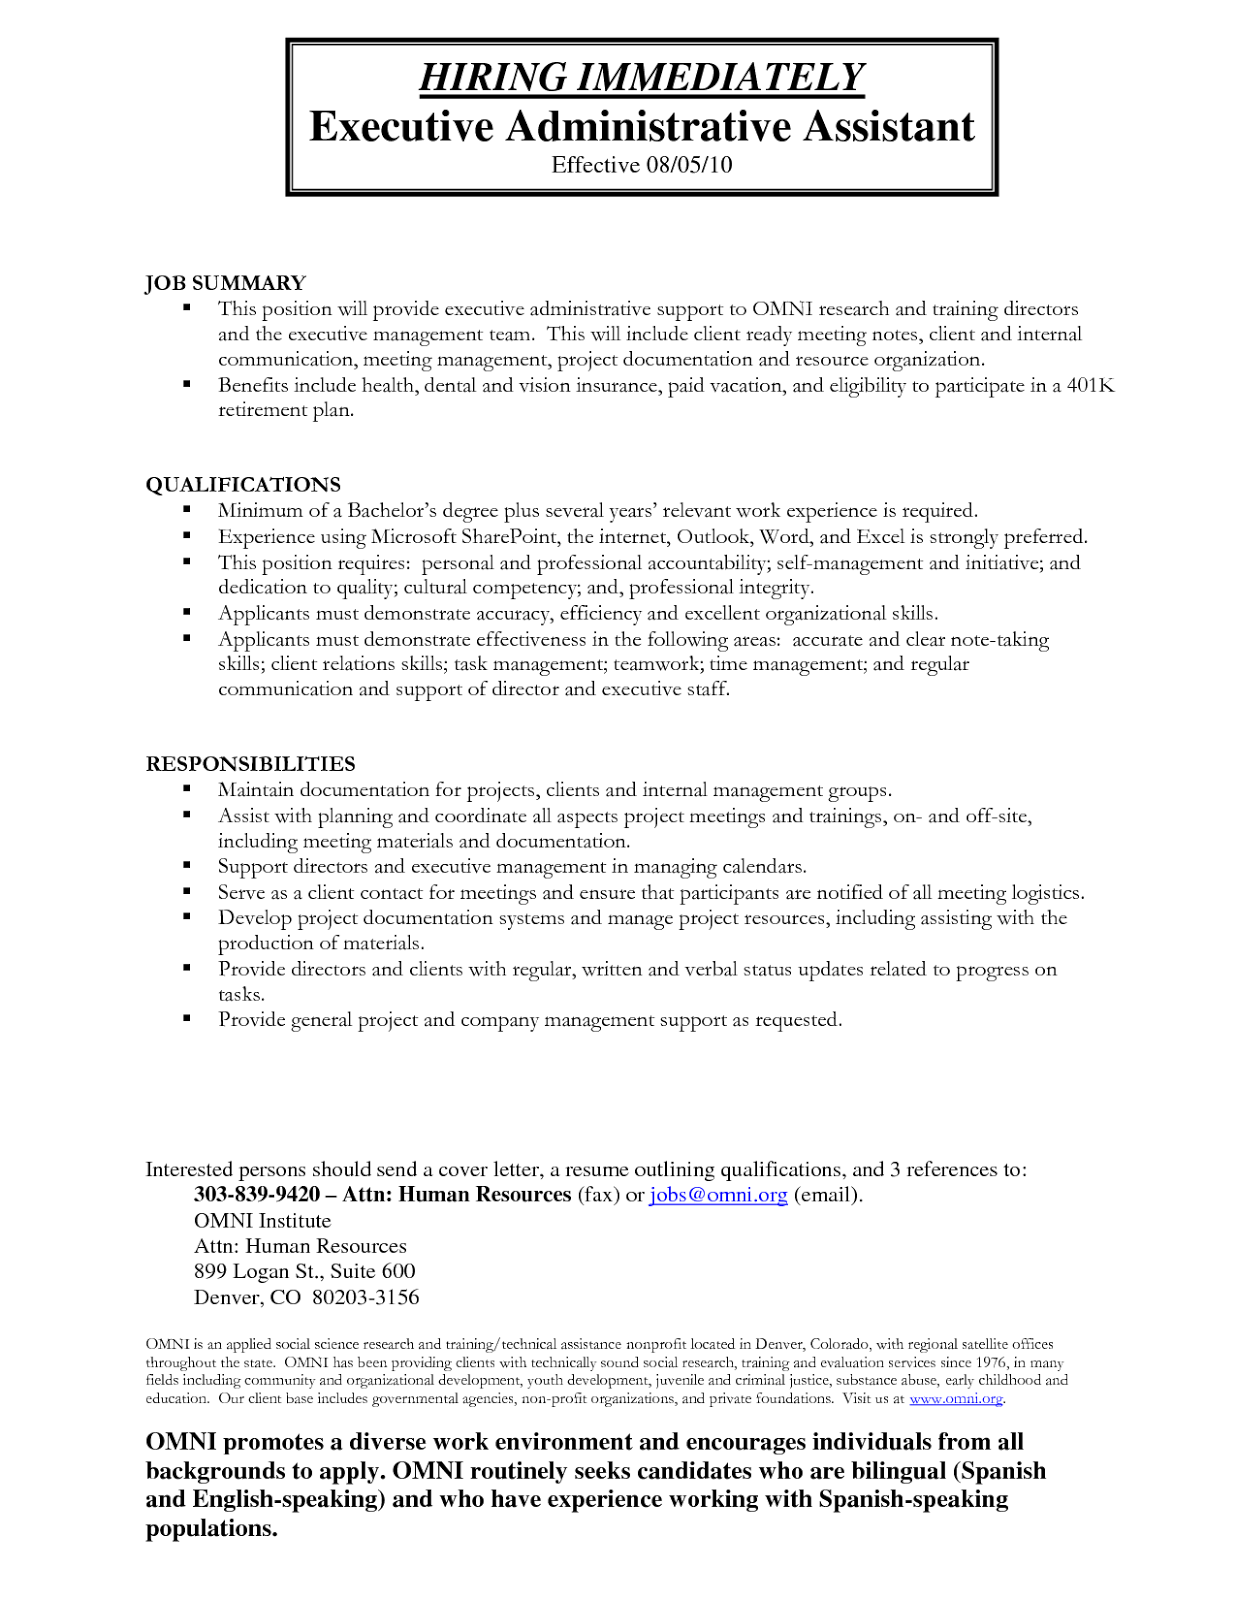 Law office assistant resume sample